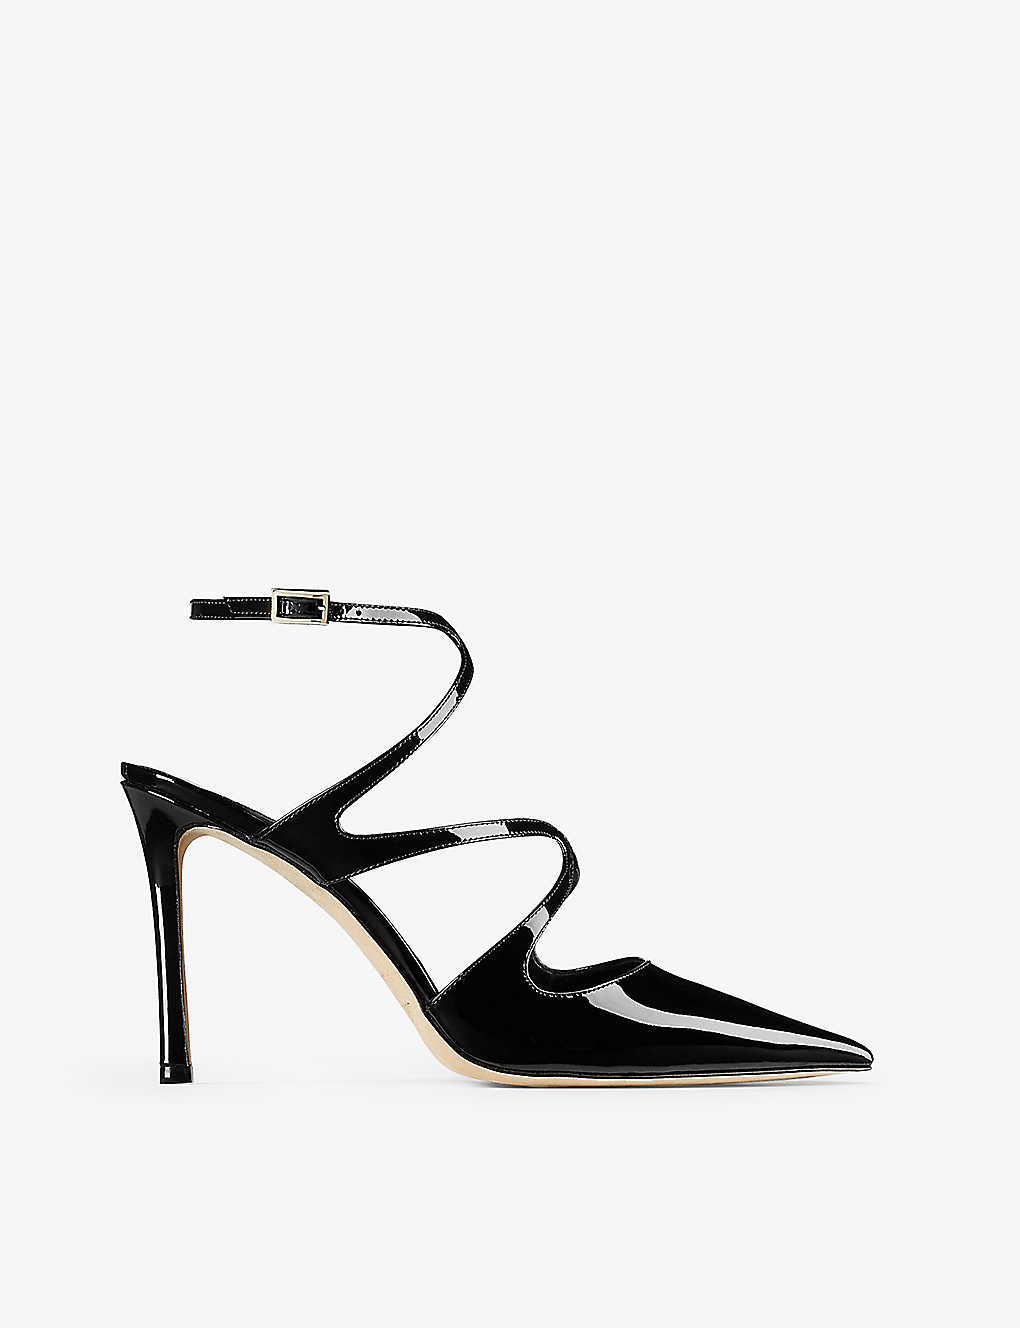 Shop Jimmy Choo Women's Black Azia 95 Pointed-toe Patent-leather Heeled Pumps